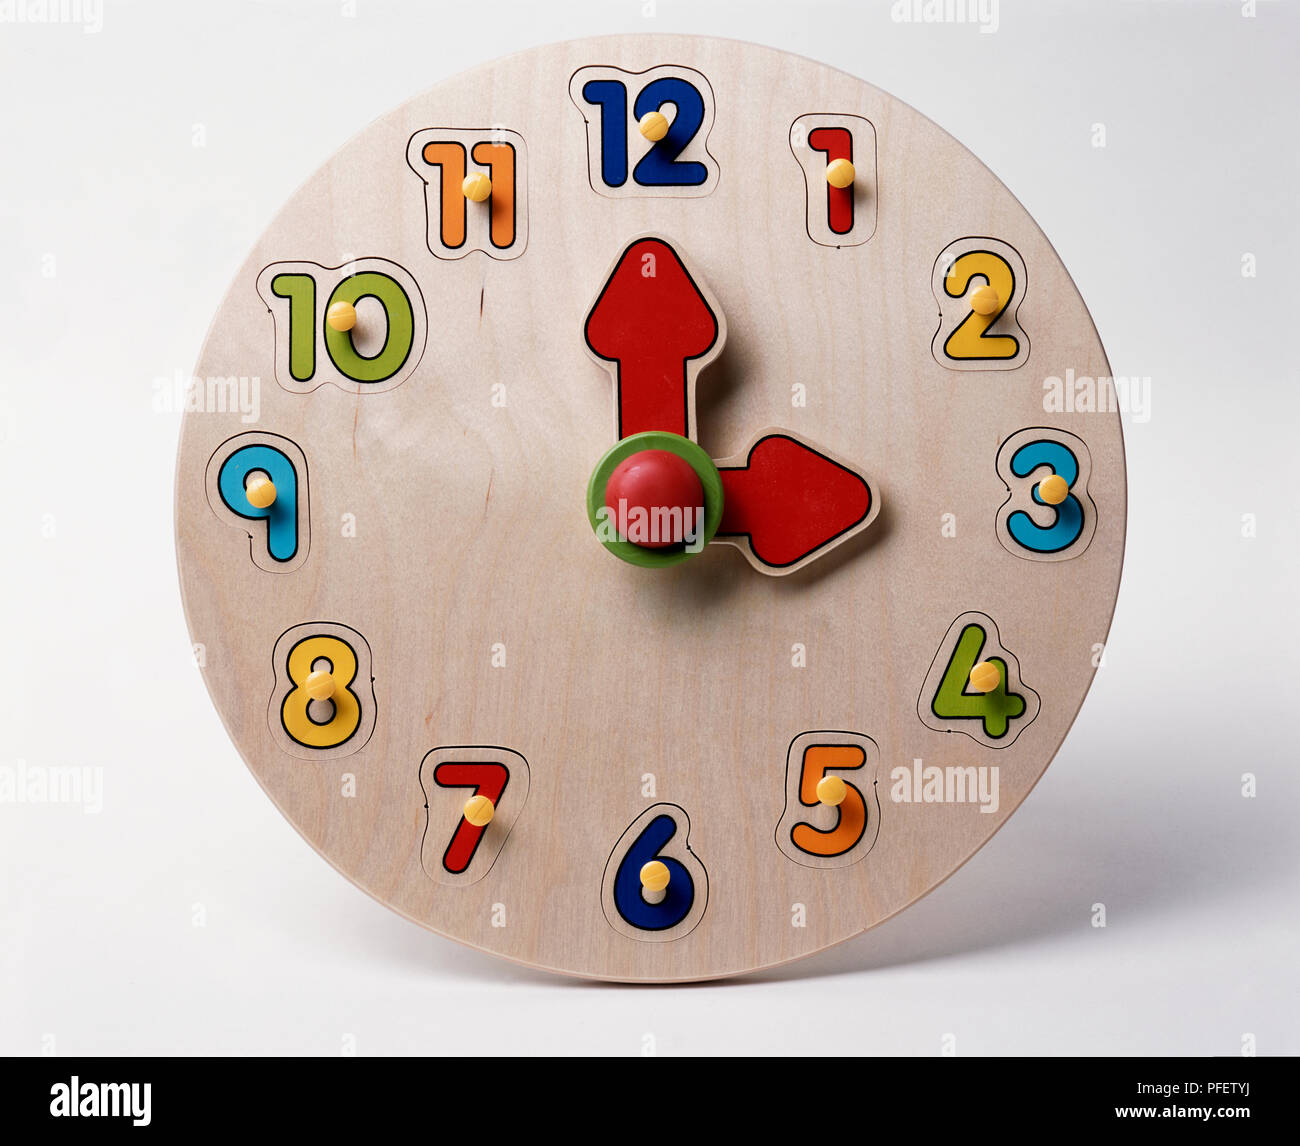 Wooden clock face with clear numbers and bright red hands, showing the time as three o'clock. Stock Photo